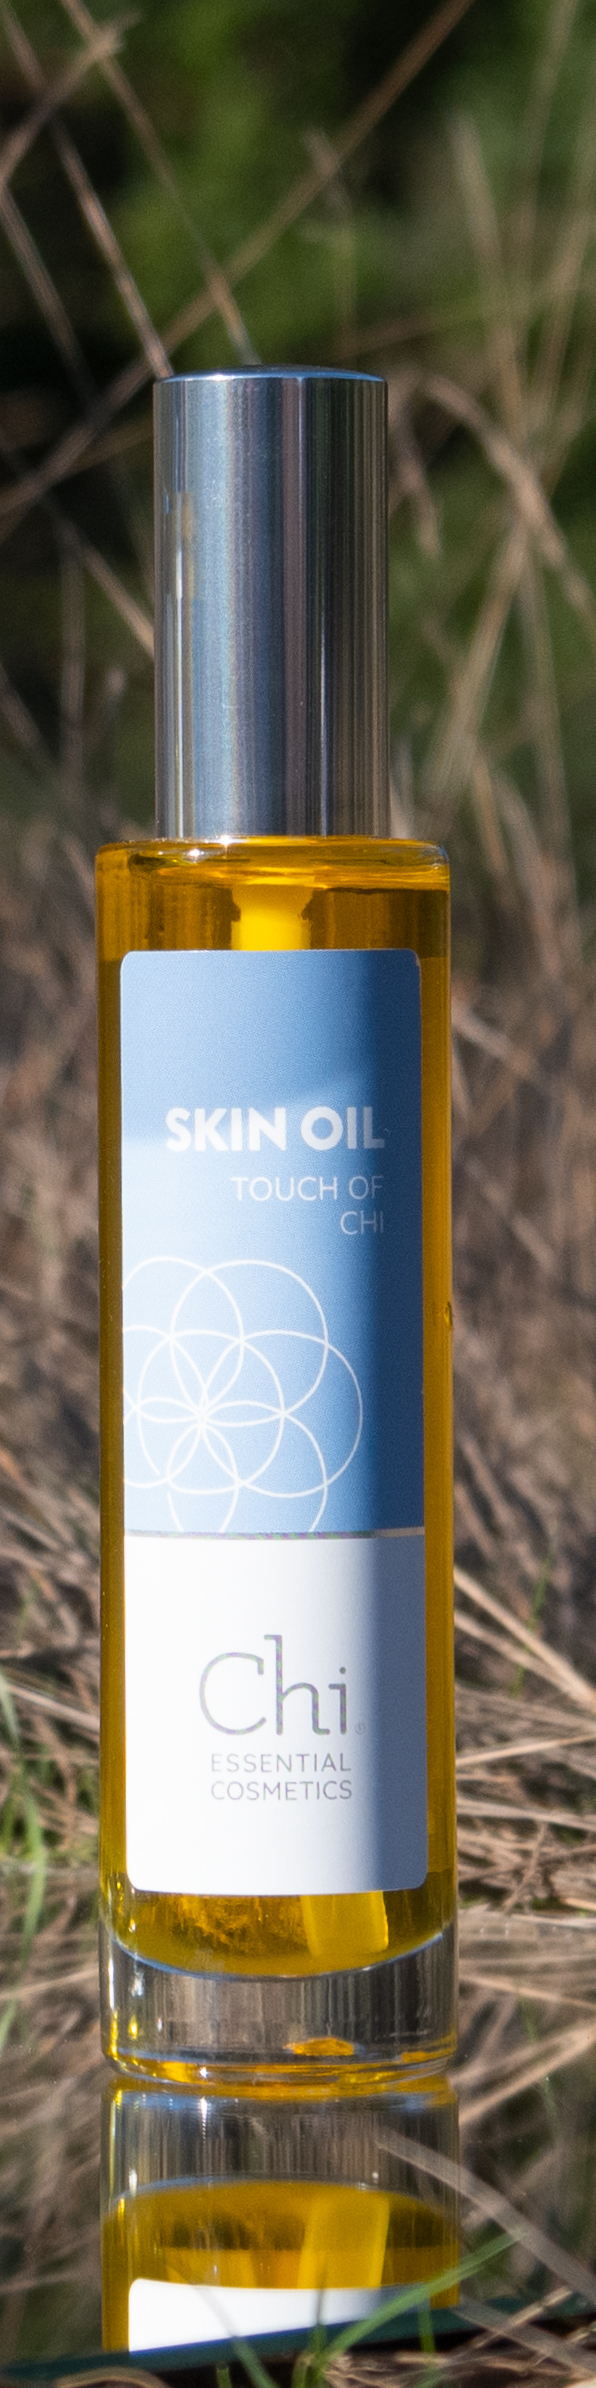 A Touch of Chi Skin Oil Heide